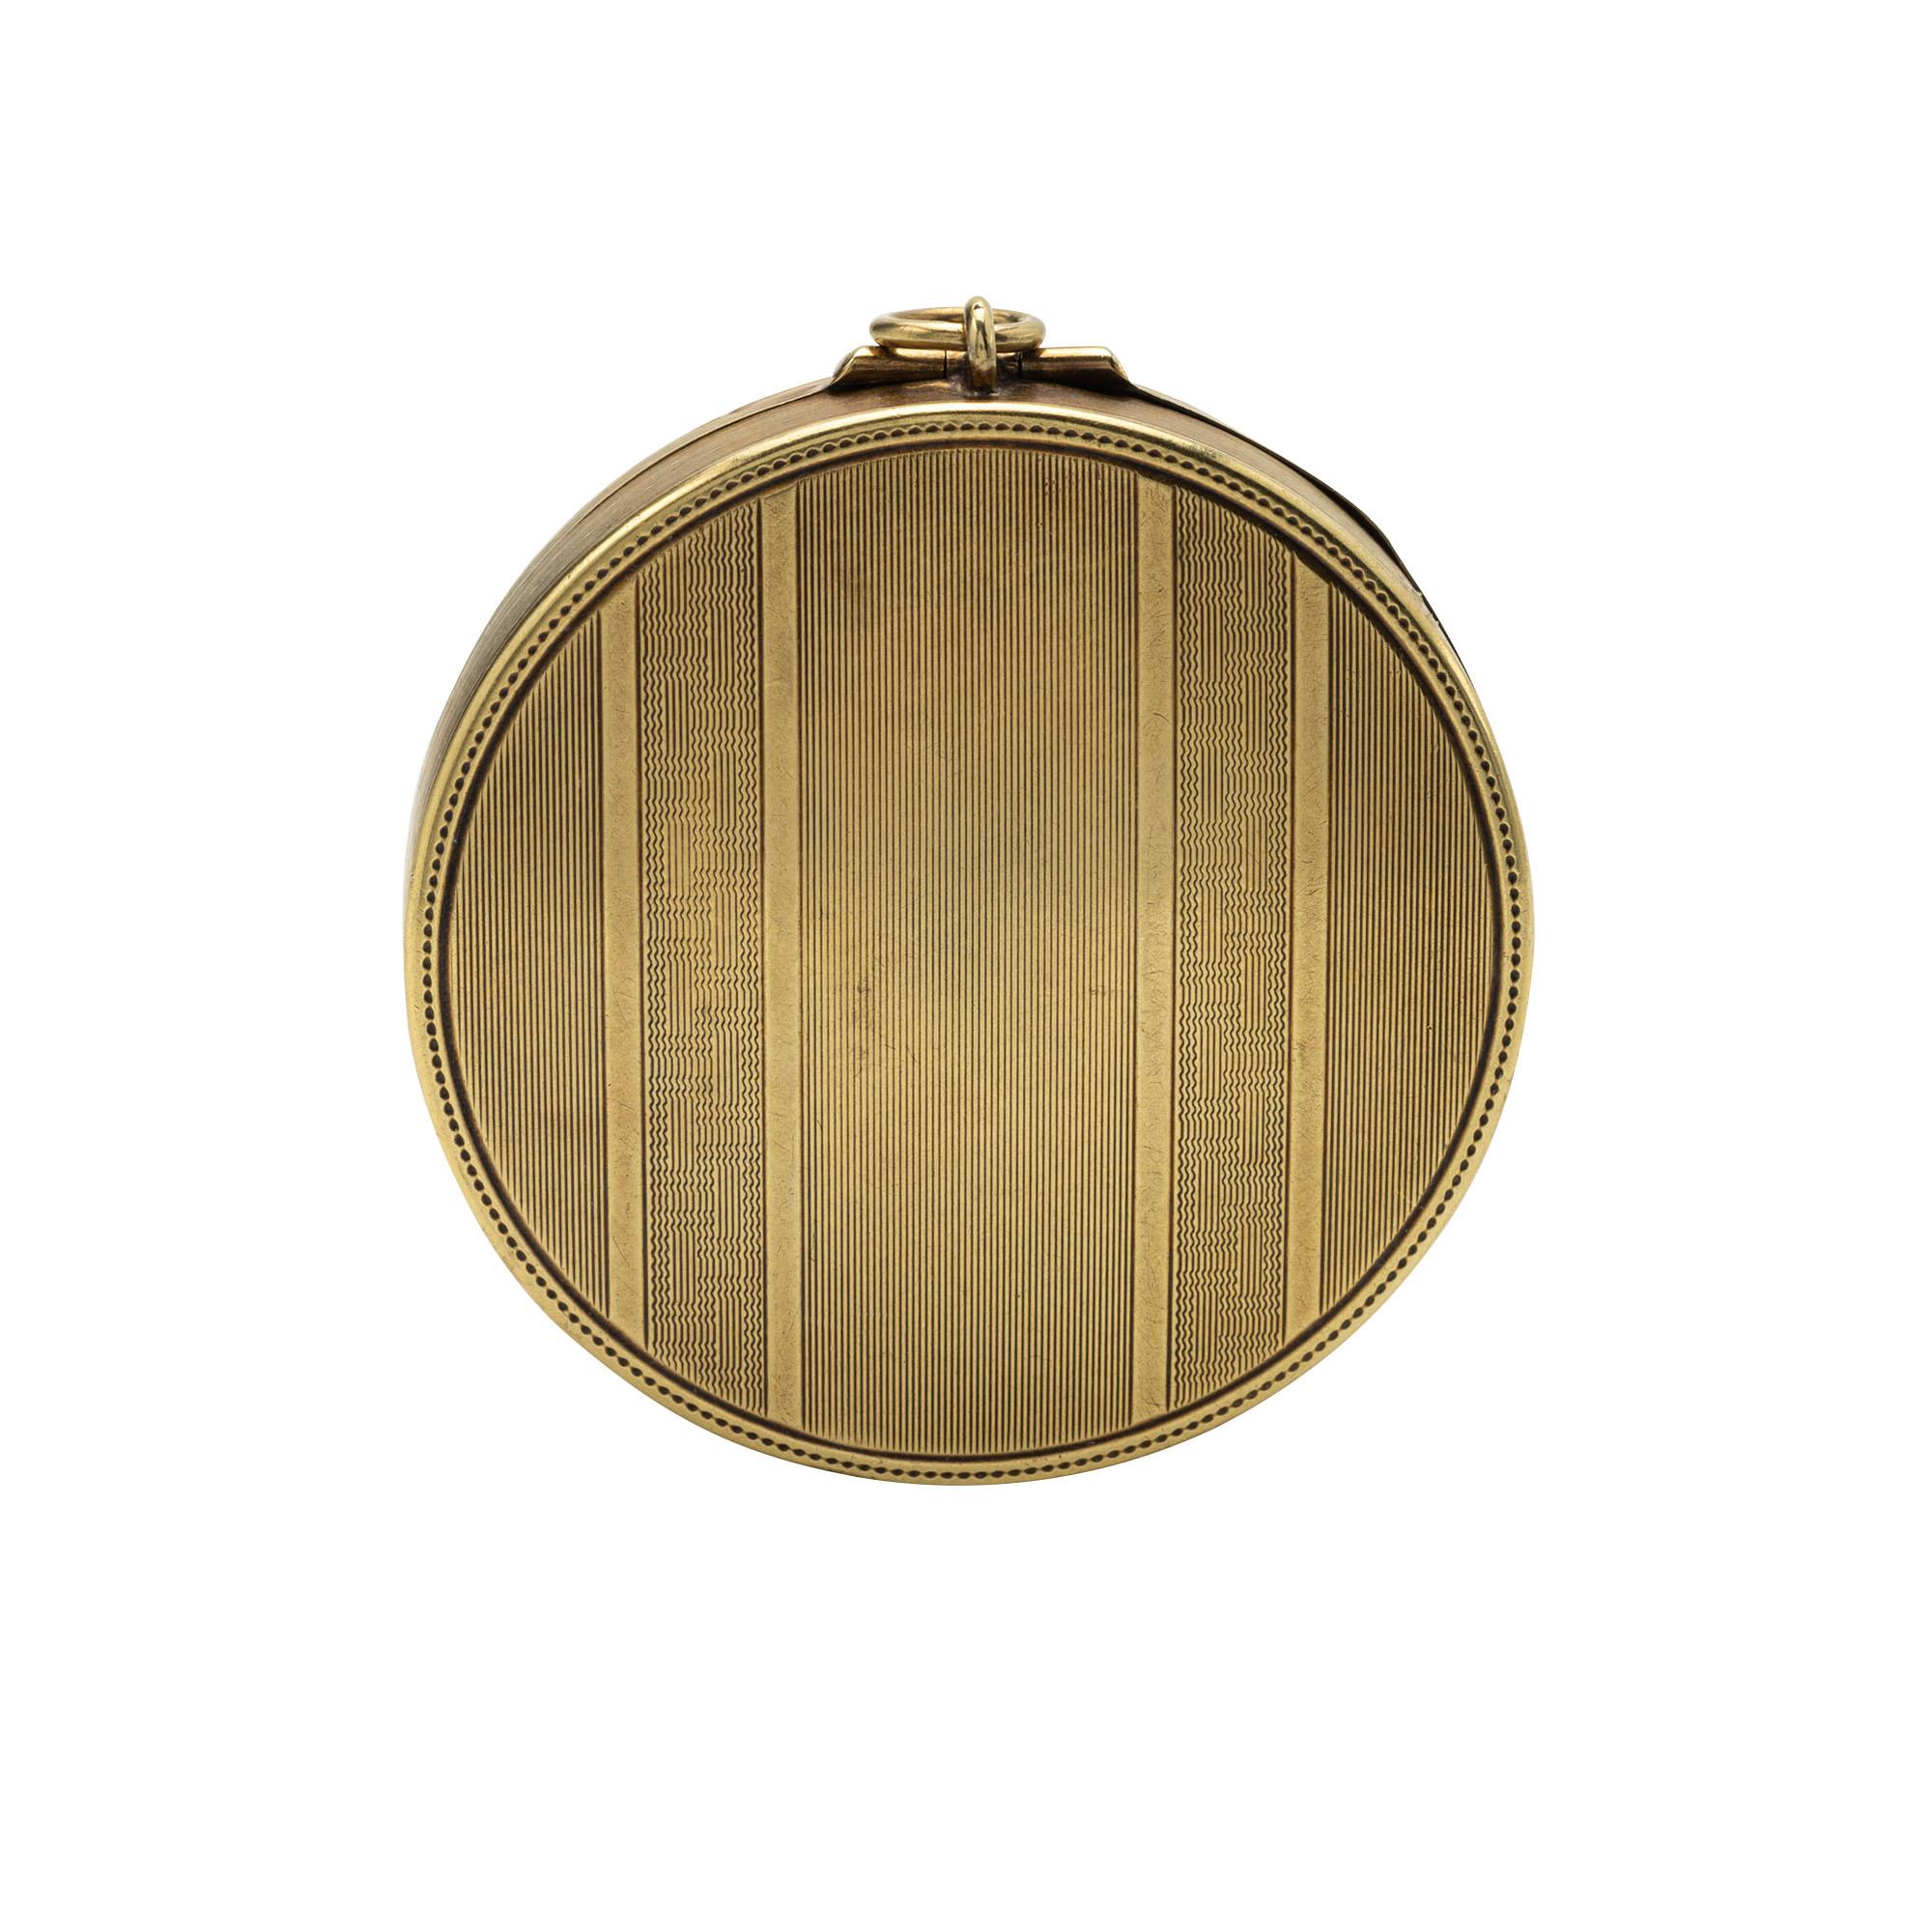 Compact of Textured Gold Patterns, Opening to Reveal a Fitted Mirror